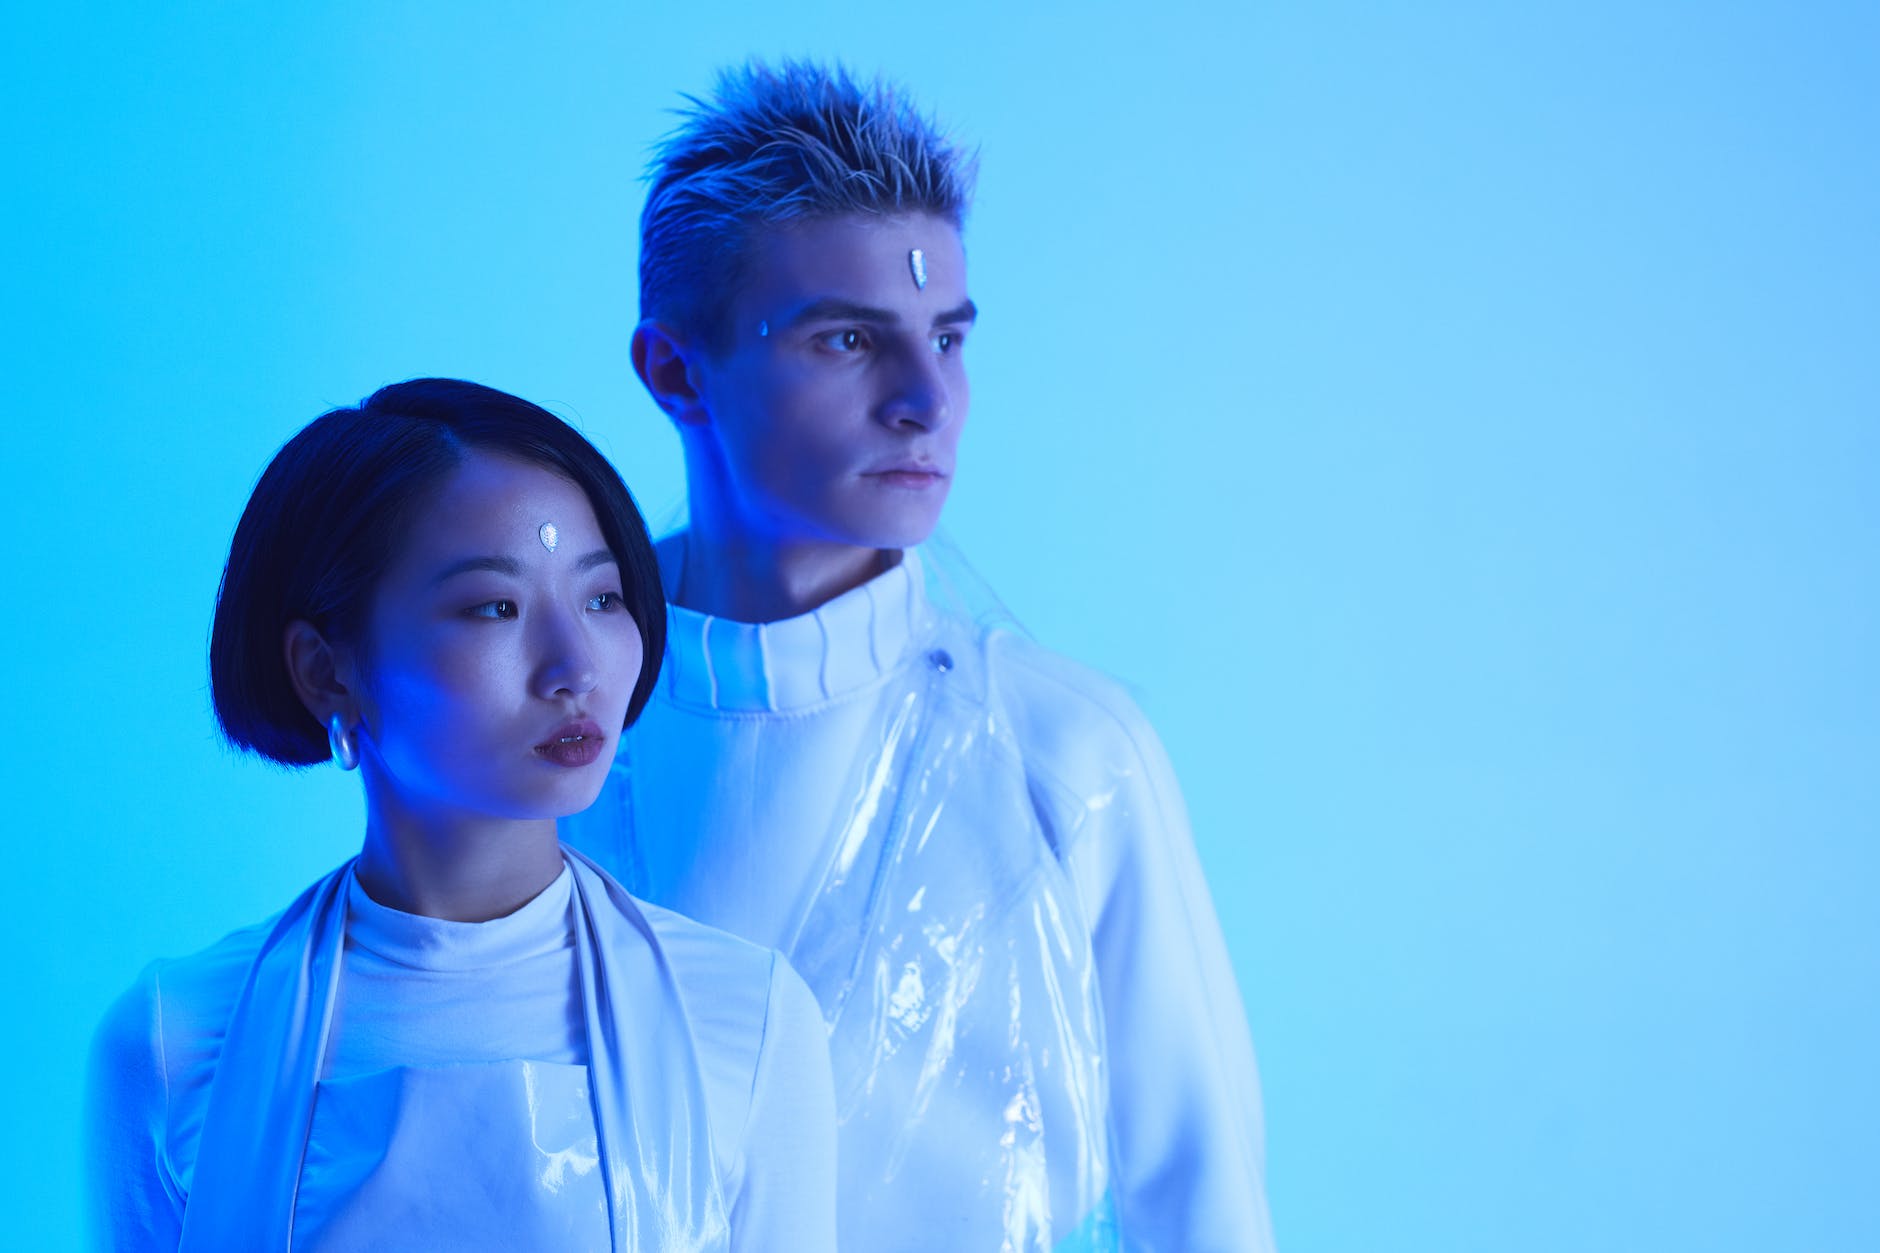 futuristic photo of a young man and woman standing in blue lighting